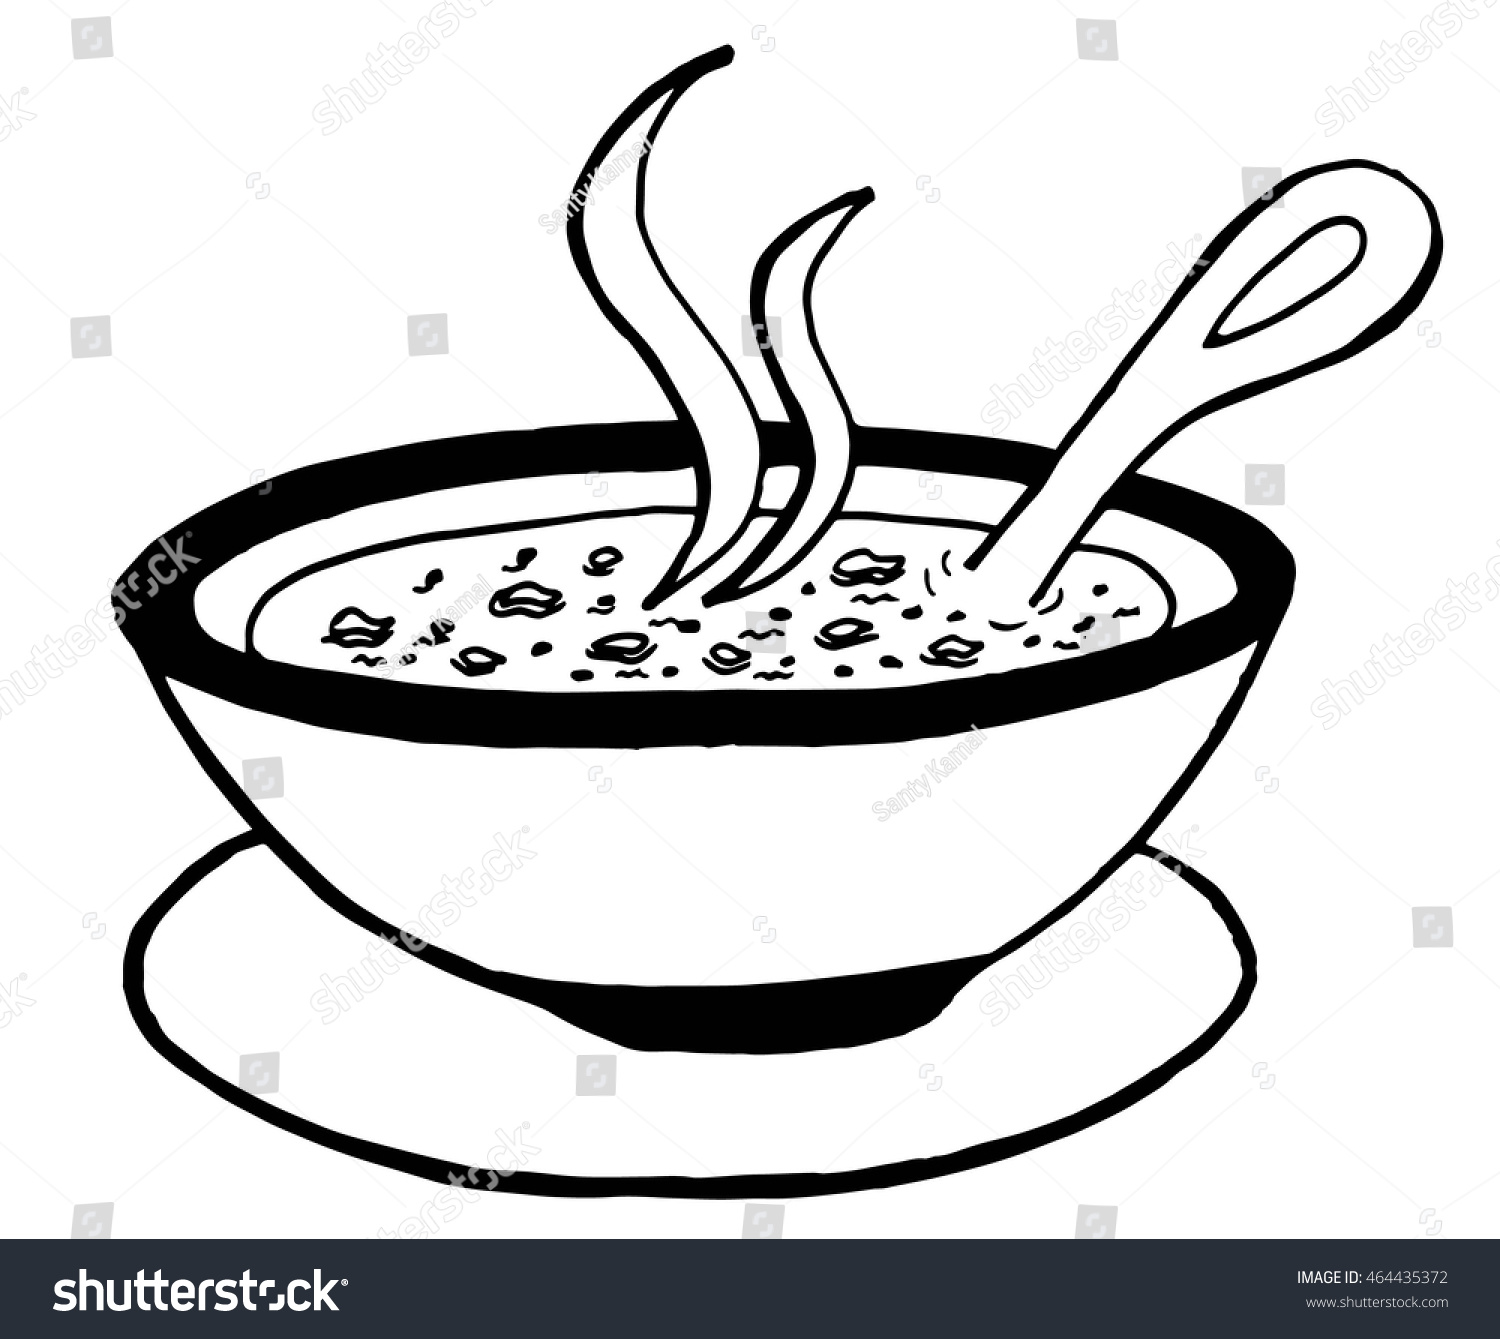 5704 Bowl free clipart.